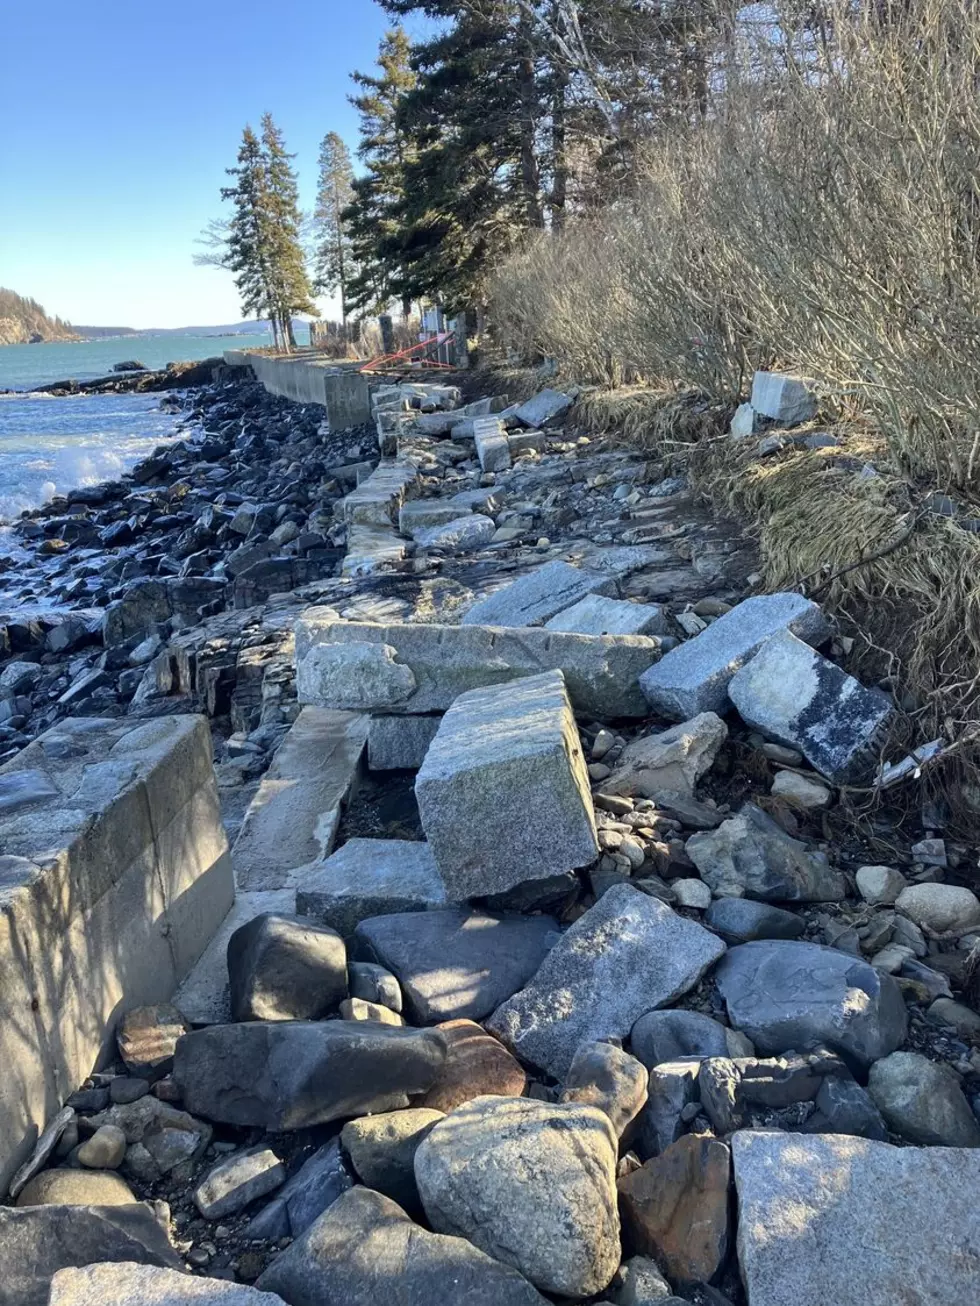 Interview with Kim Swan re: Village Improvement Association’s Fundraising Request for Shore Path Repairs [VIDEO]